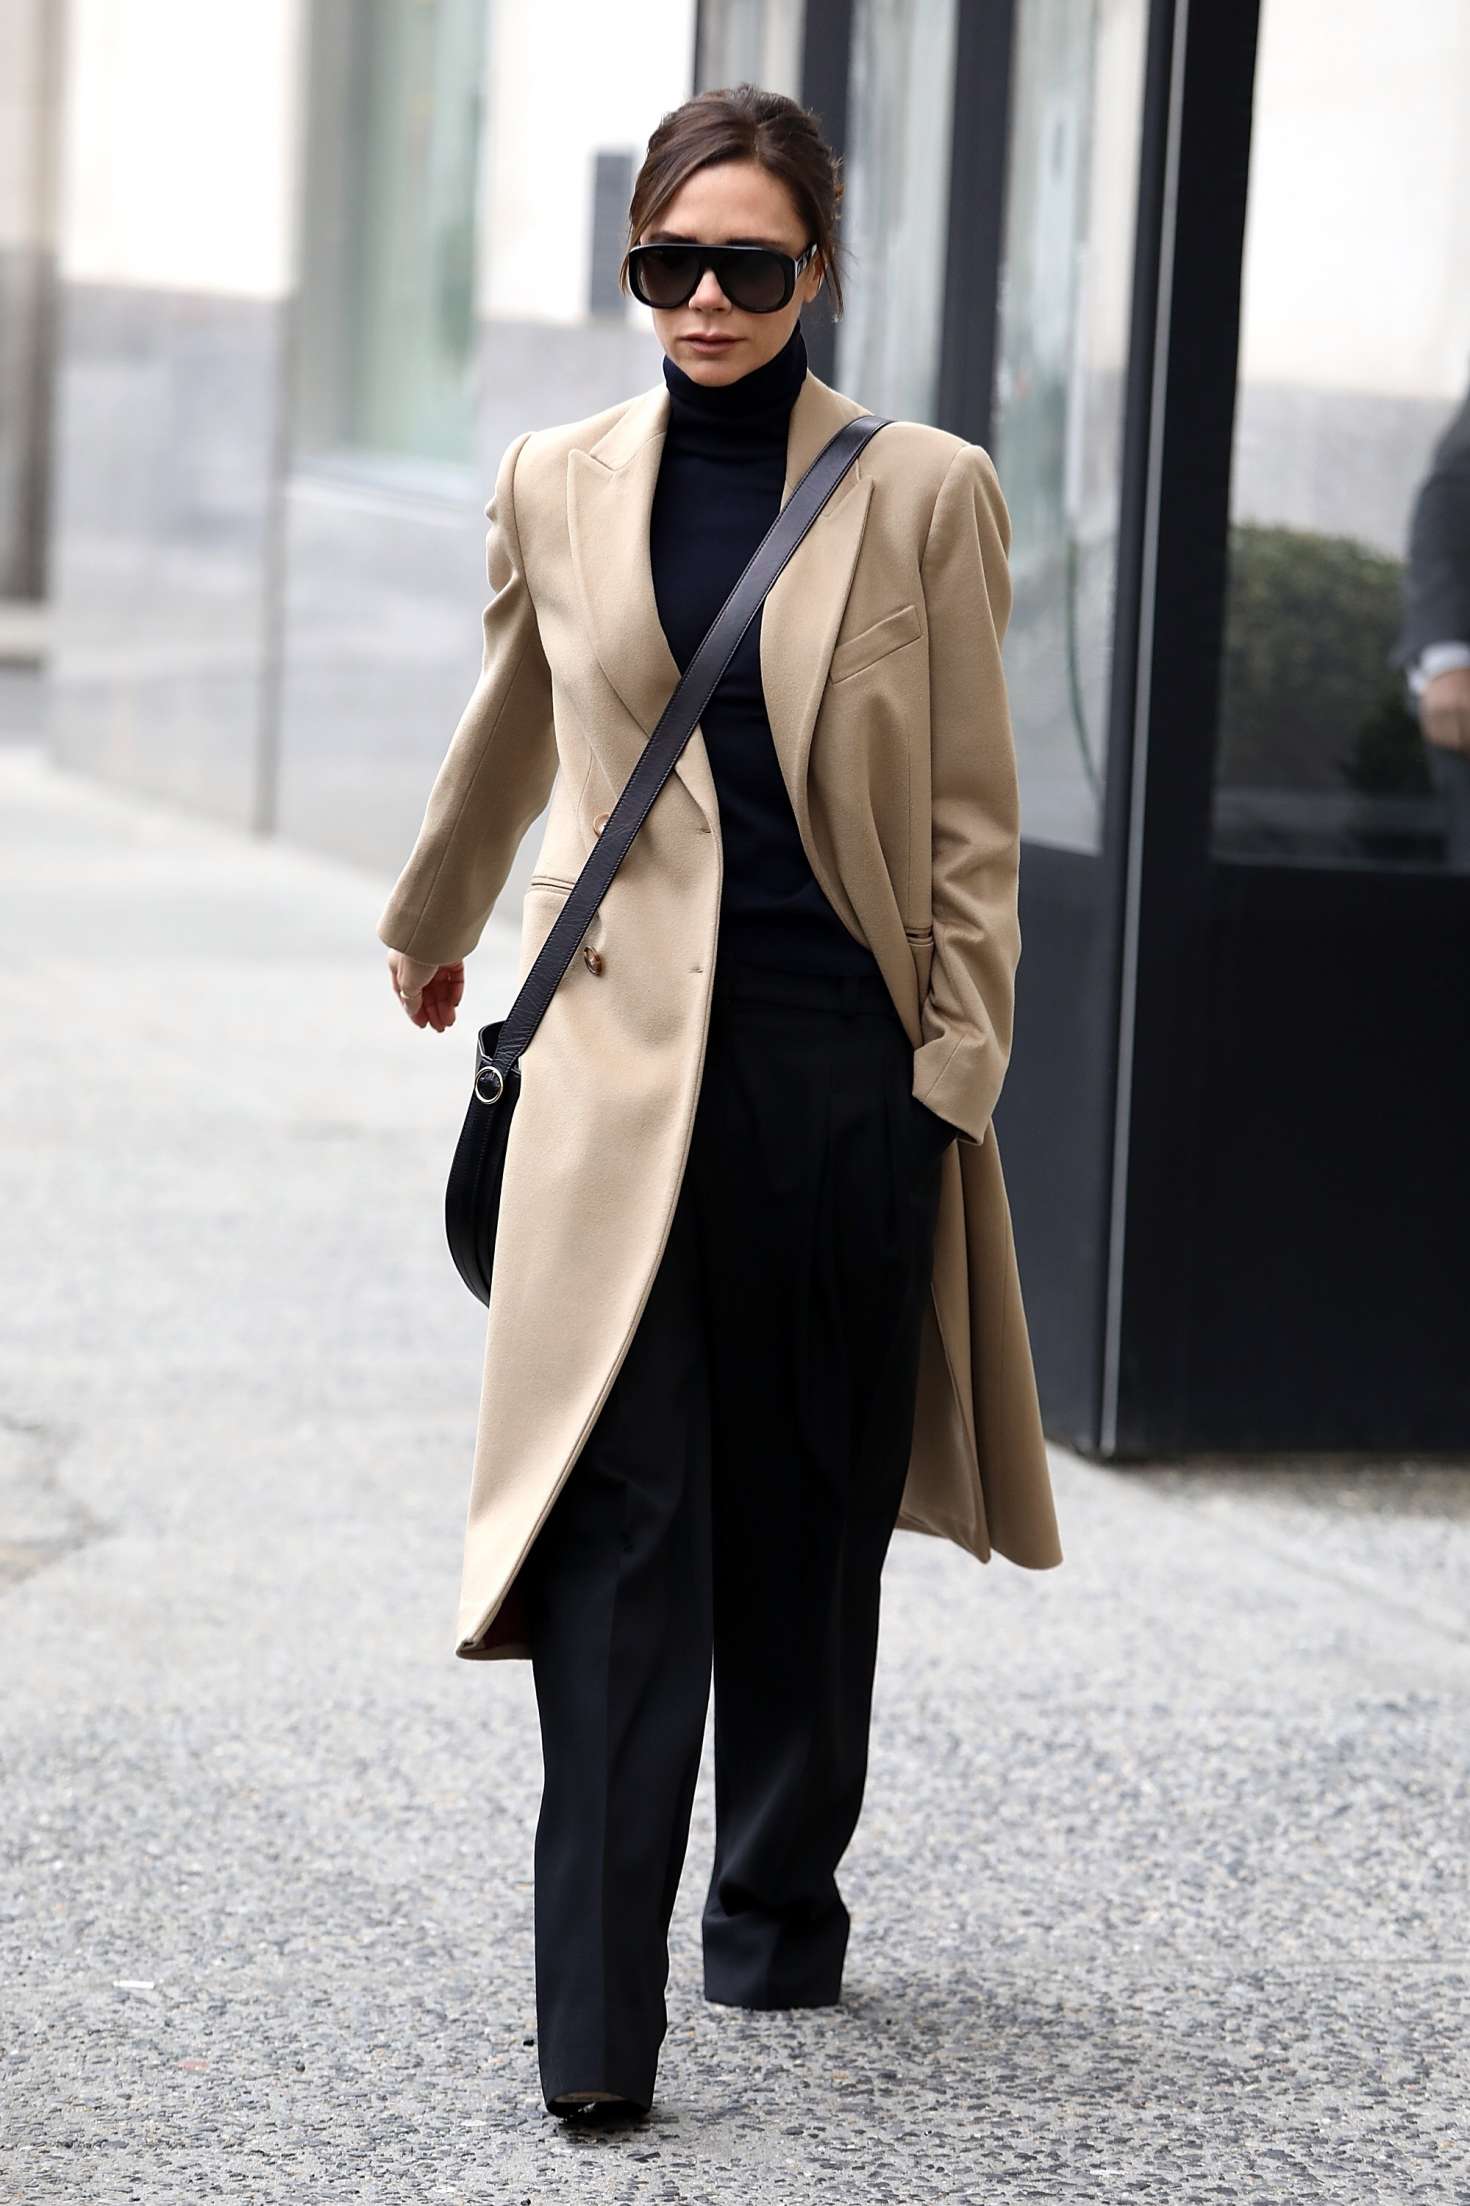 Victoria Beckham out and about in New York -07 | GotCeleb